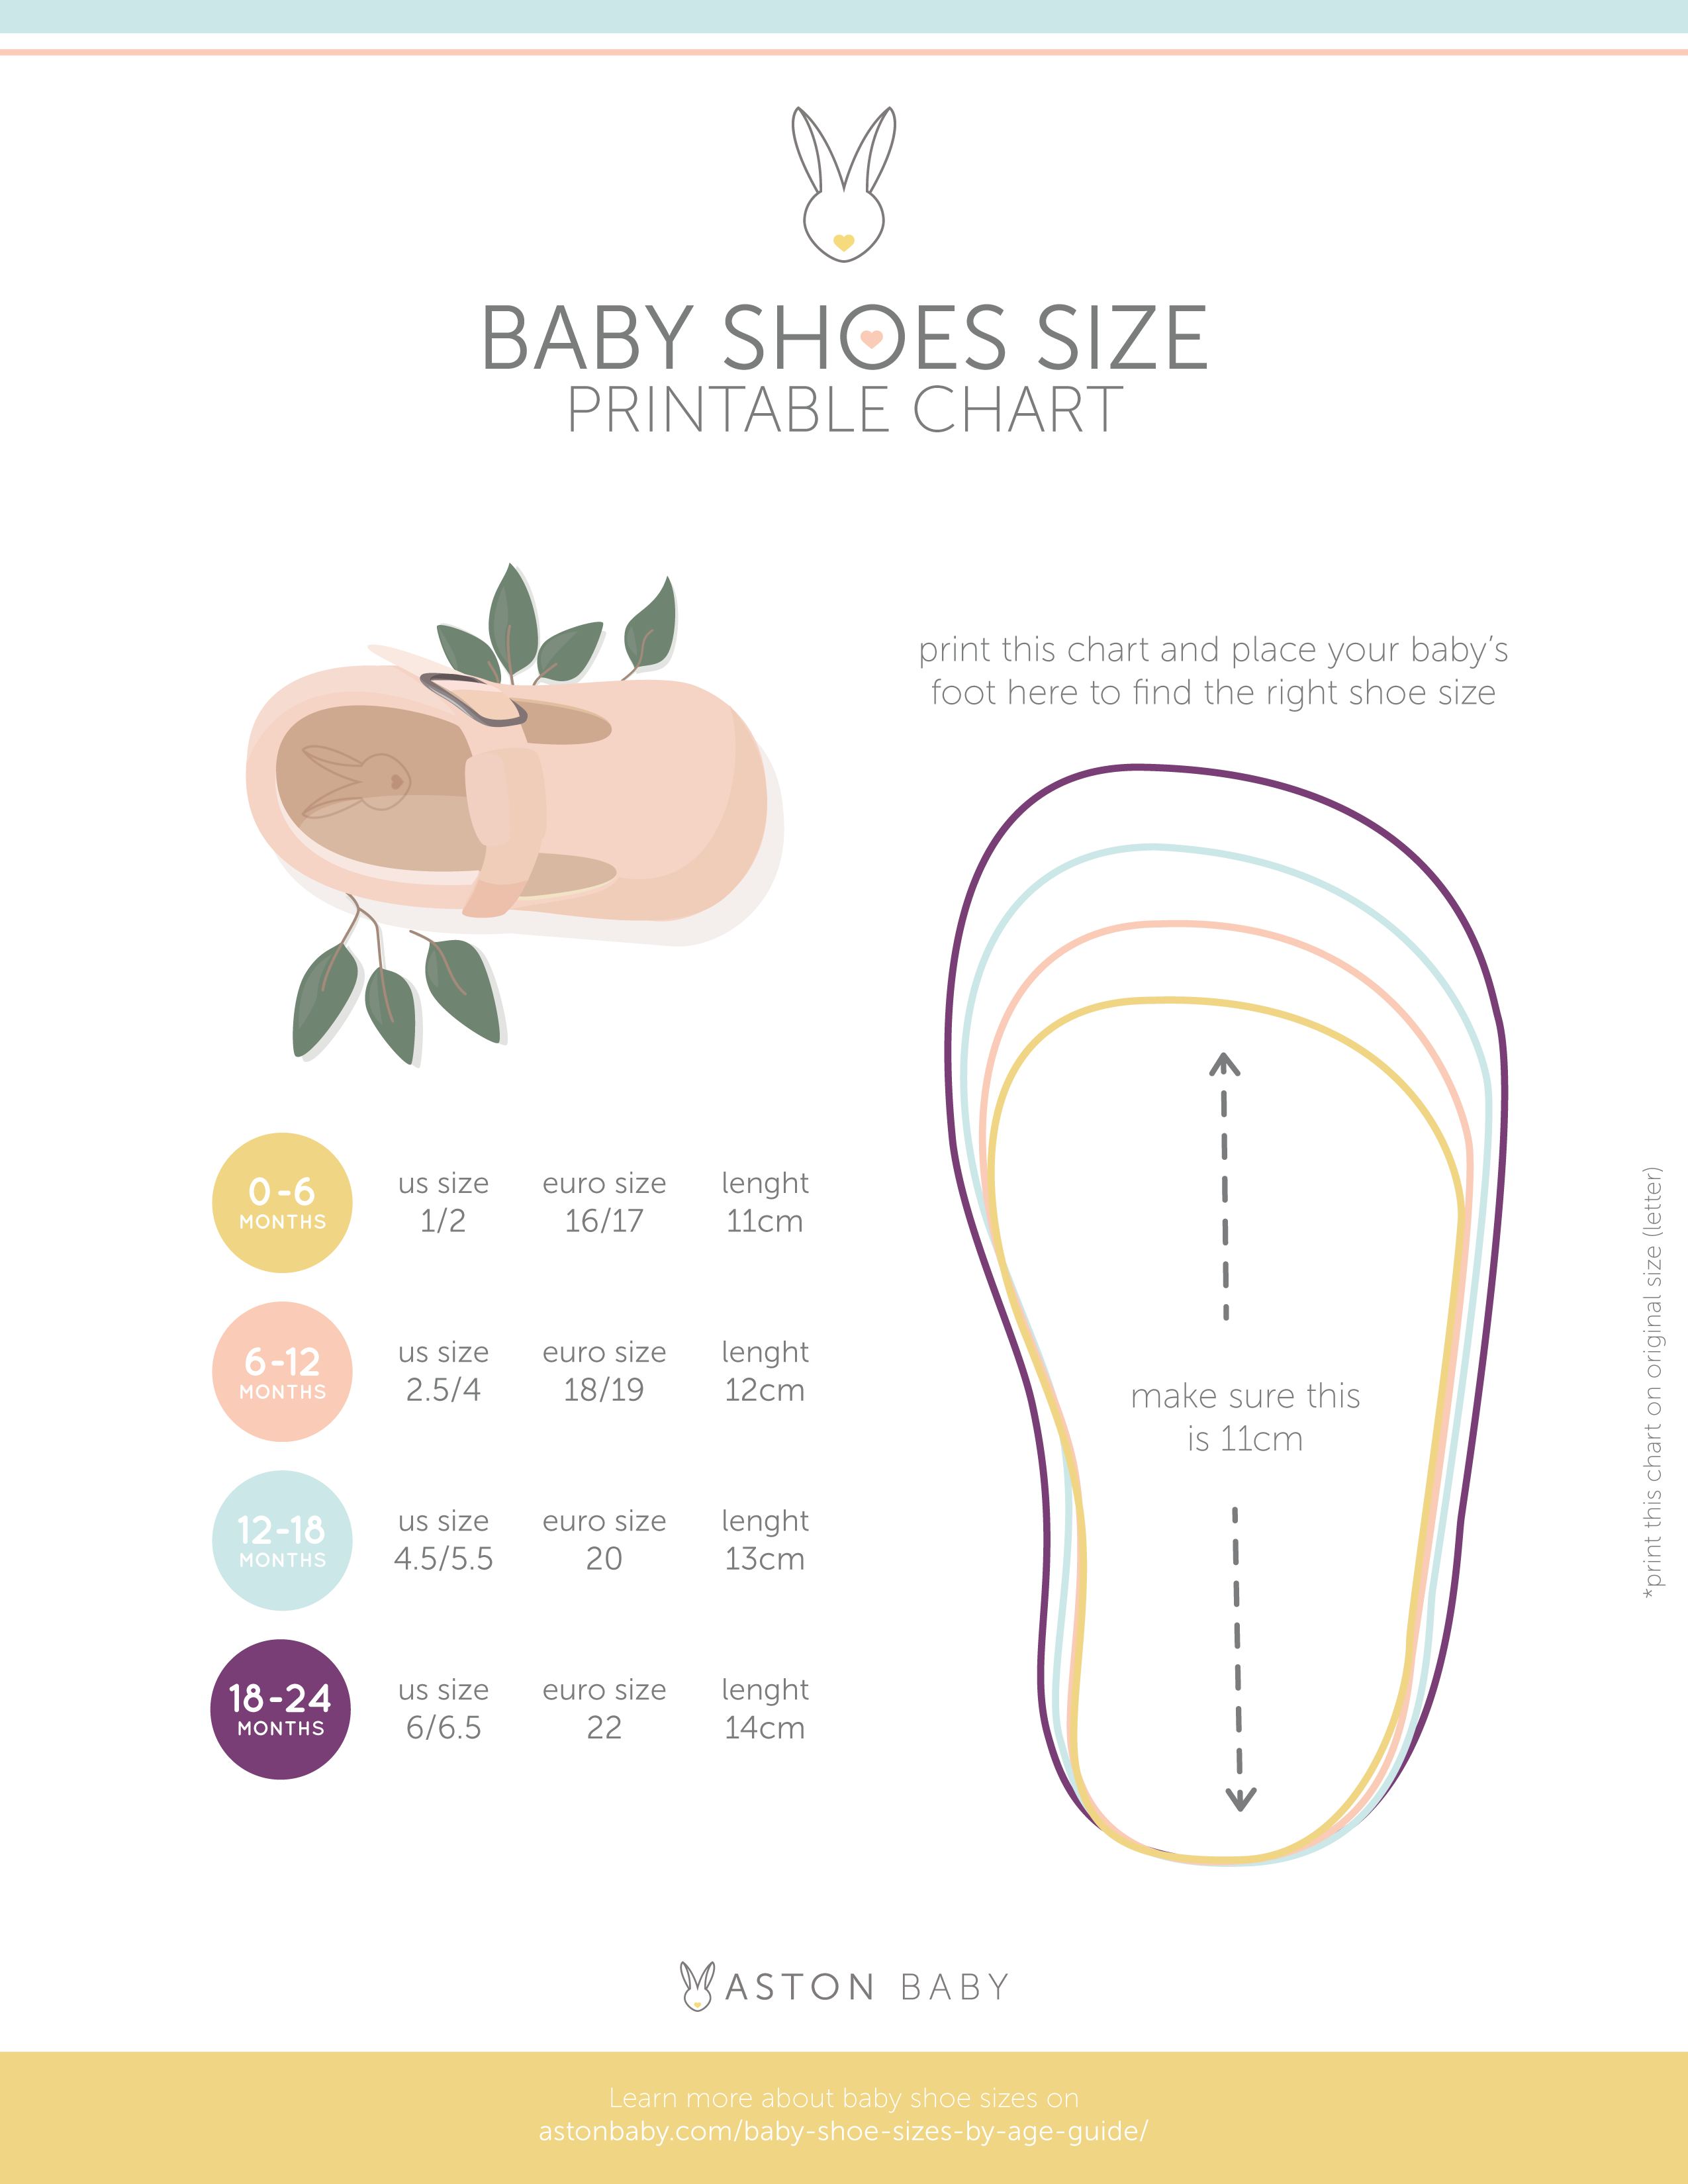 How To Select Baby Shoe Sizes Based On Your Baby’s Age: A Guide - Aston ...